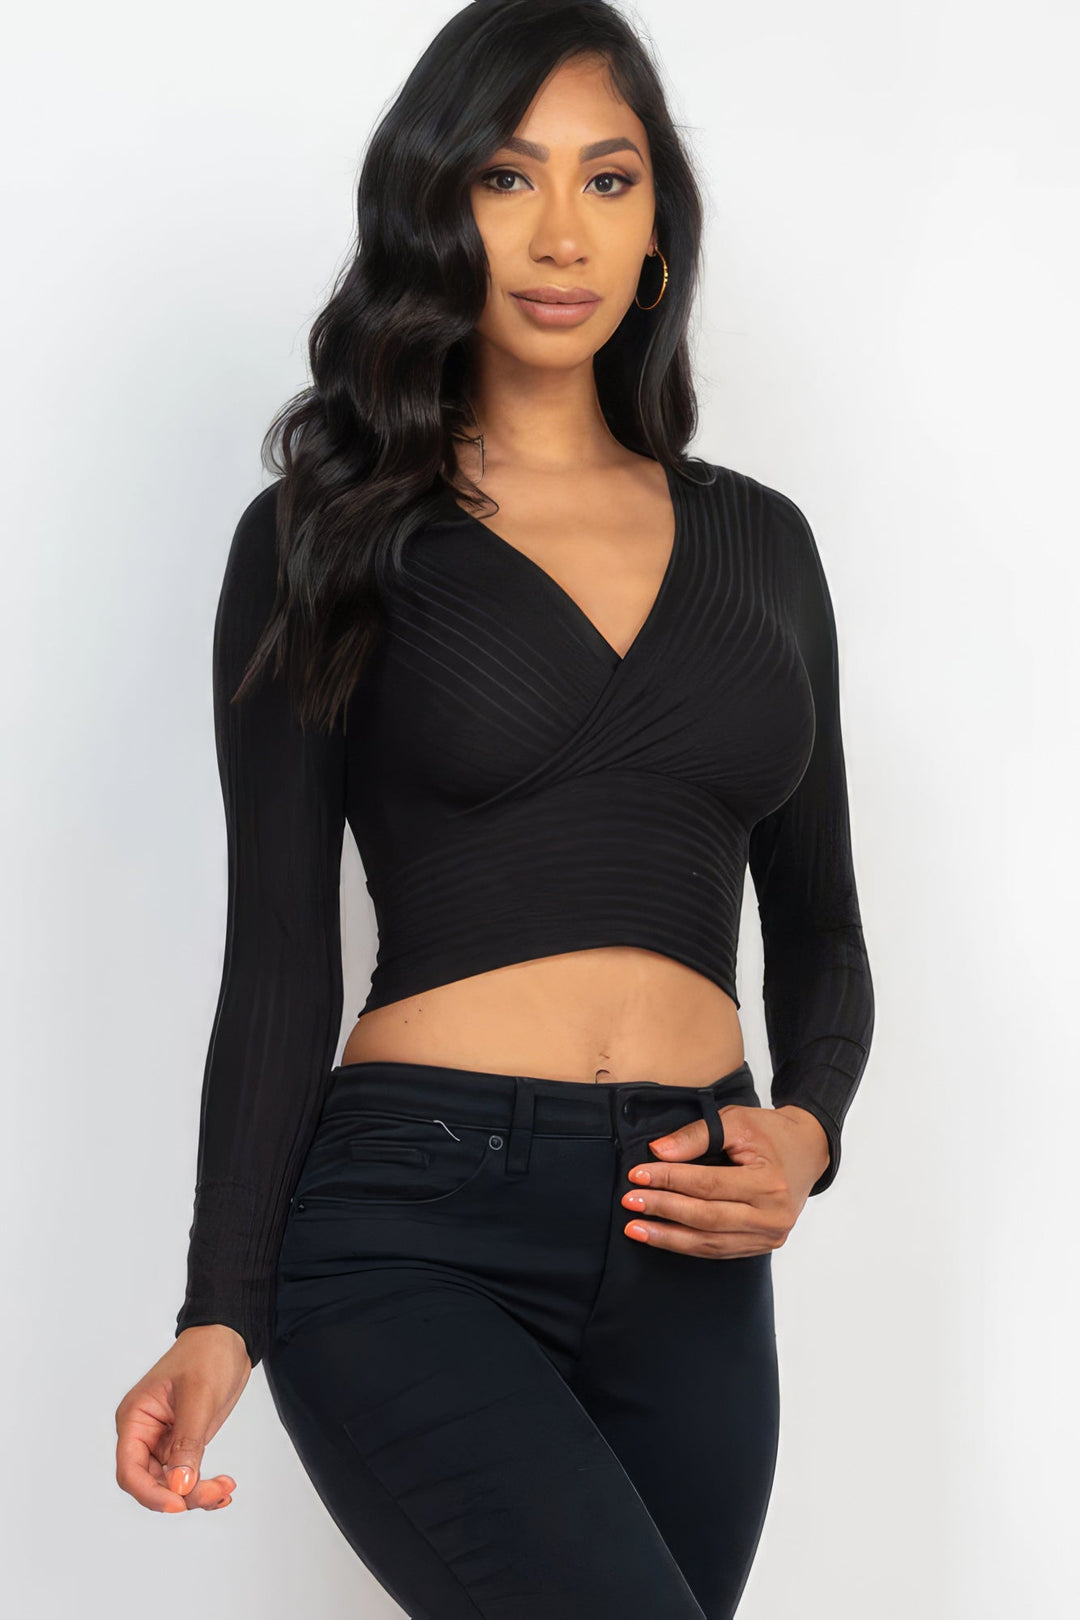 The802Gypsy  shirts and tops ❤GYPSY LOVE-Ribbed Wrap Front Long Sleeve Top